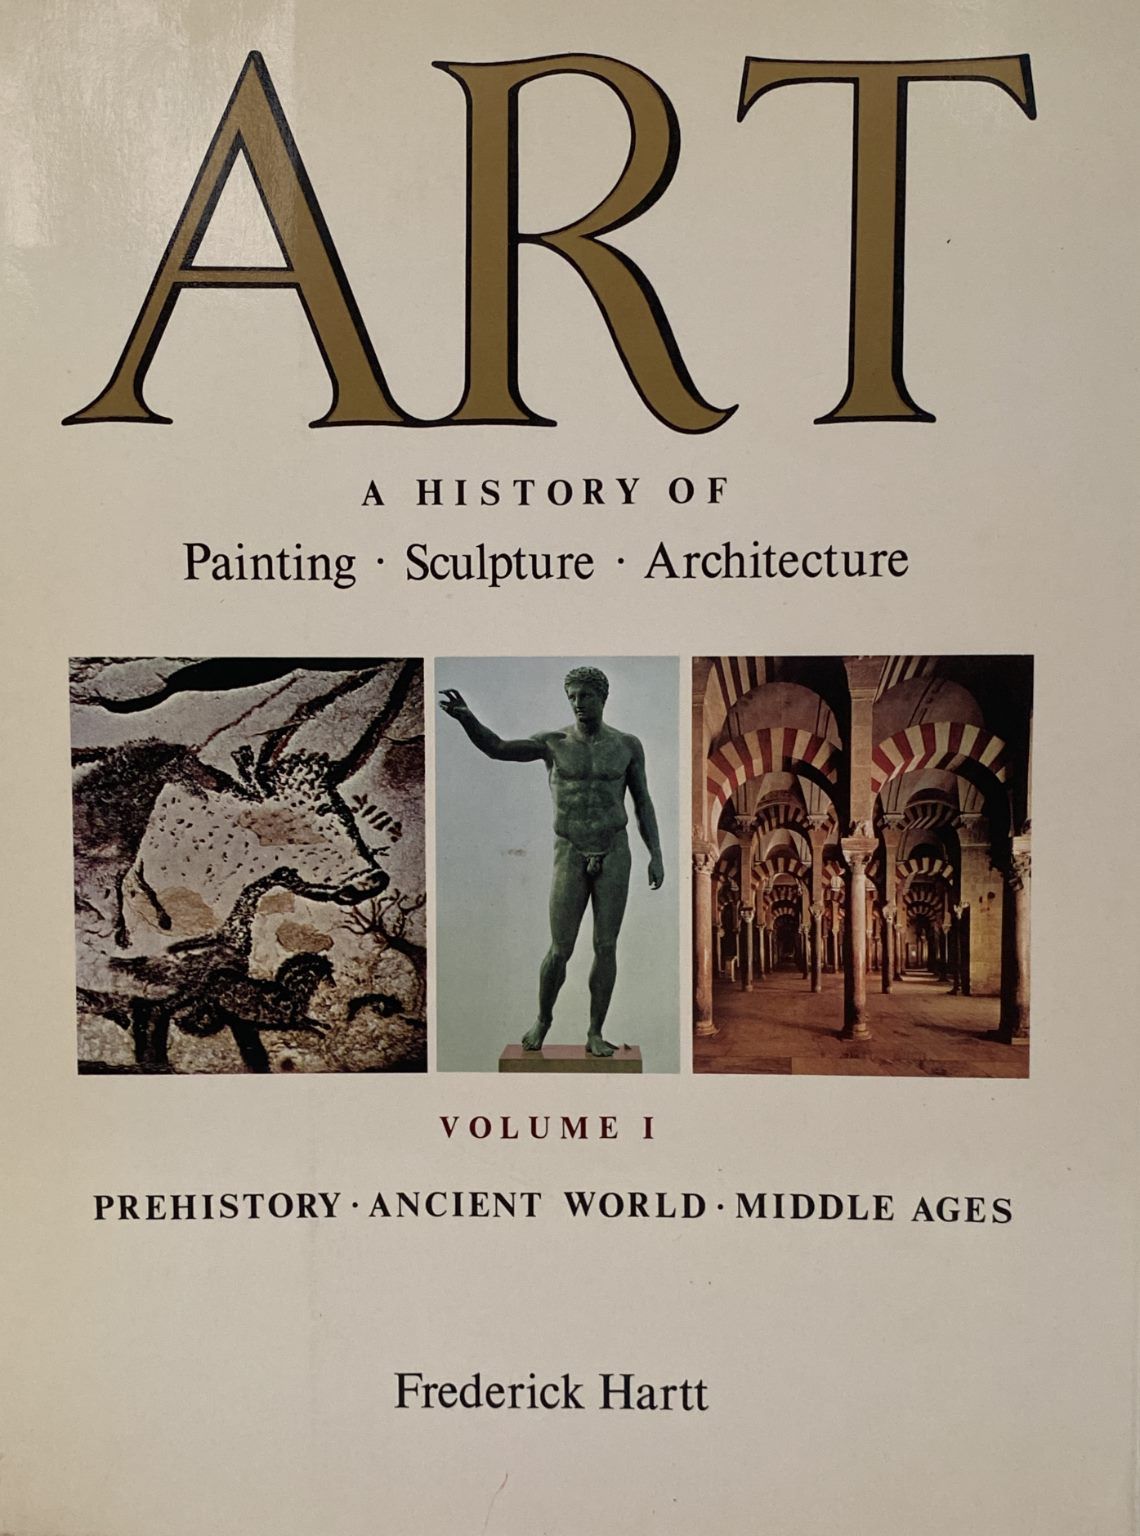 ART: A History of Painting, Sculpture, Architecture